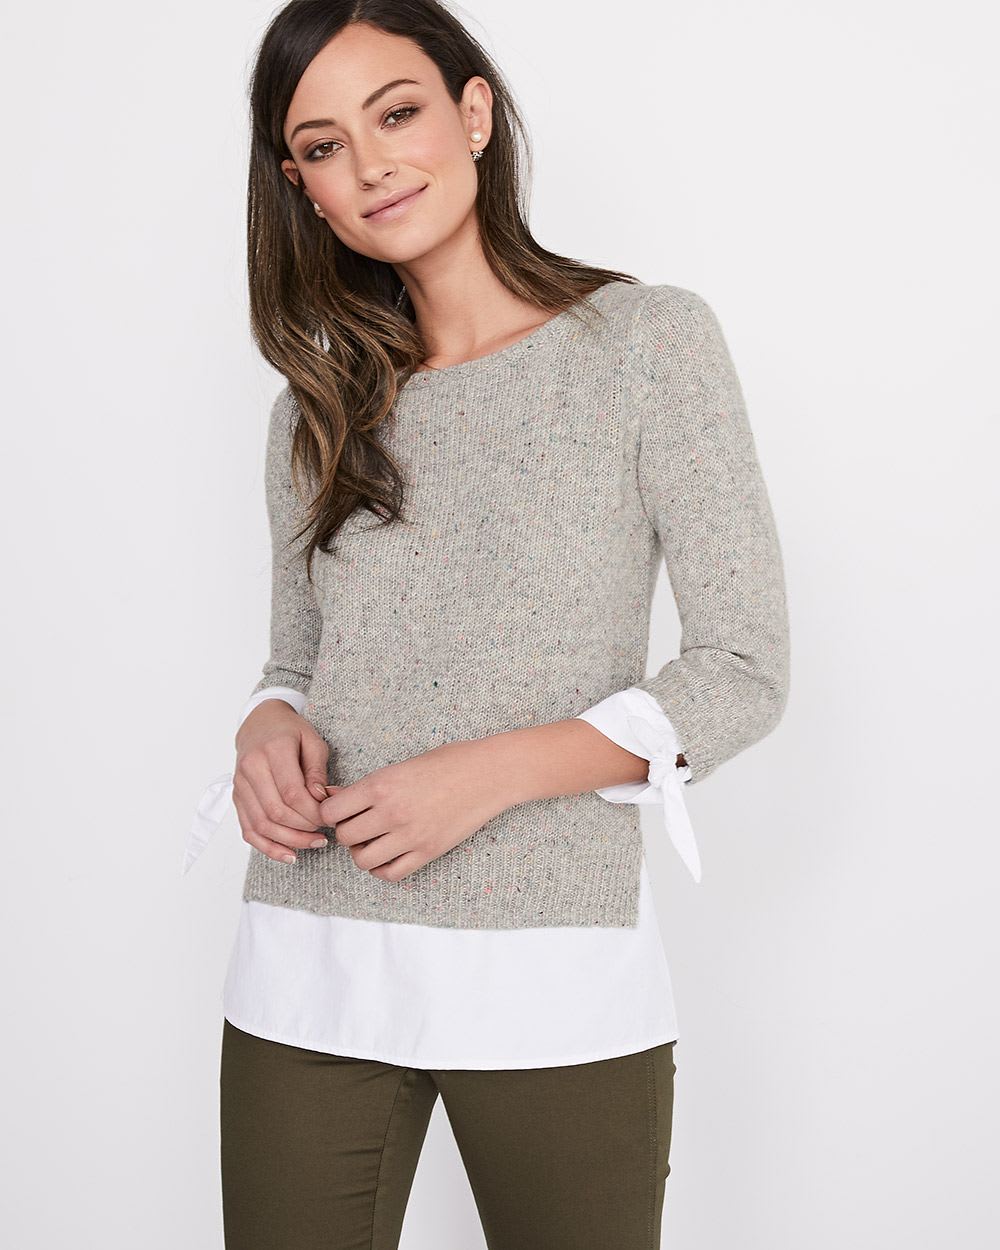 2-in-1 Mixed Media Nep Sweater | RW&CO.